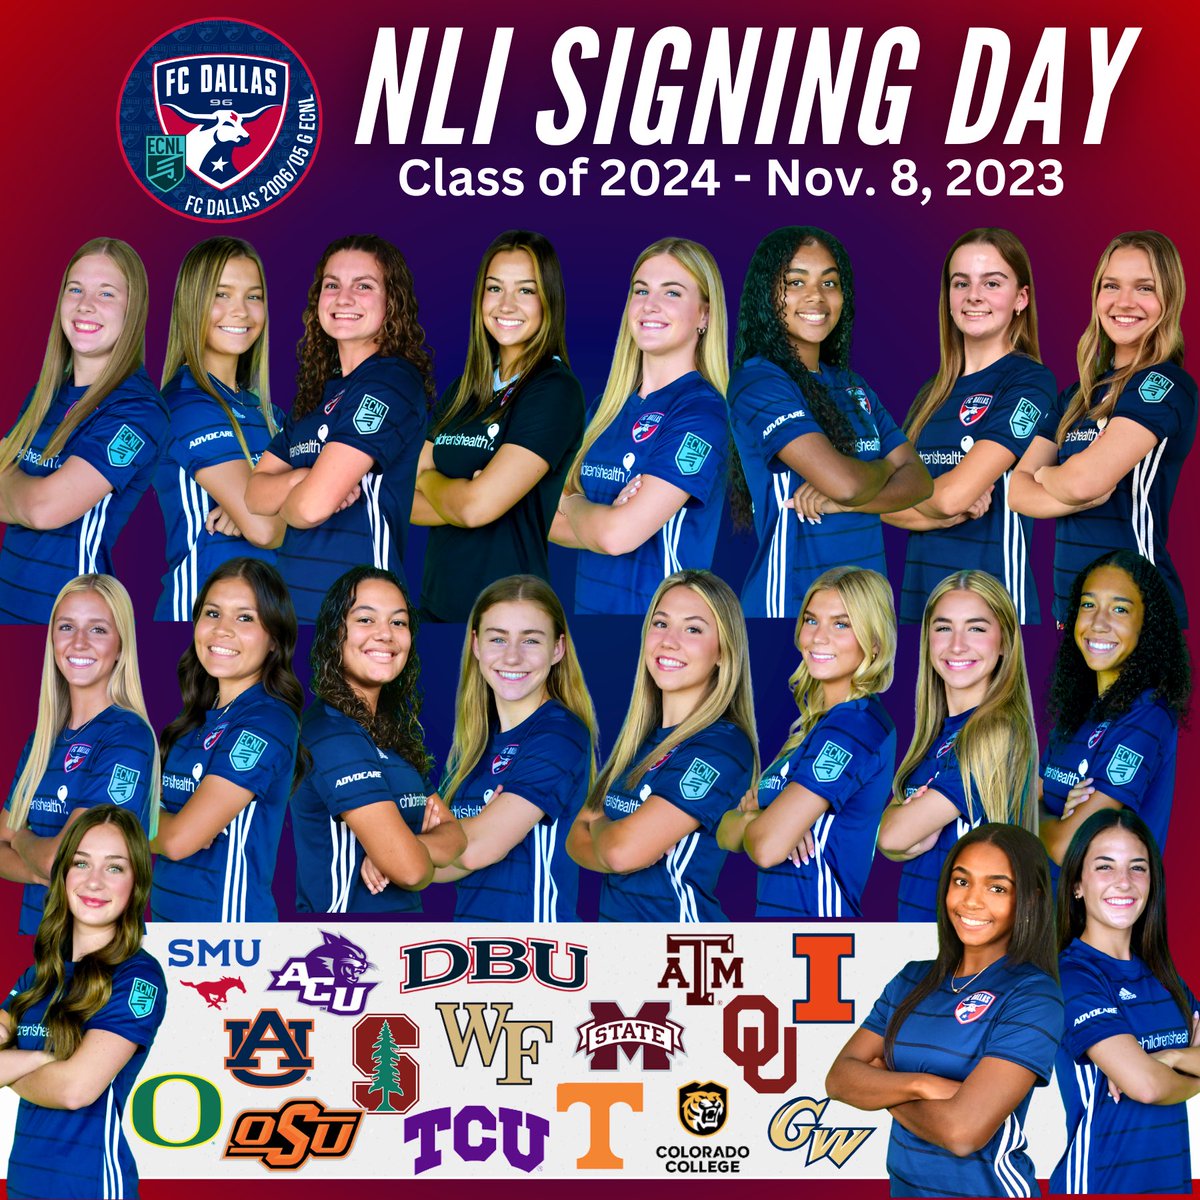 Tomorrow we honor our CLASS of 2024 as they sign their @NCAAWomenSoccer National Letter of Intent committing to be student athletes❗️#DTID #CEFHAI #19signees 📍FC Dallas Performance Center ⏰ 7:30-8:30 PM @FCDwomen | @ECNLgirls